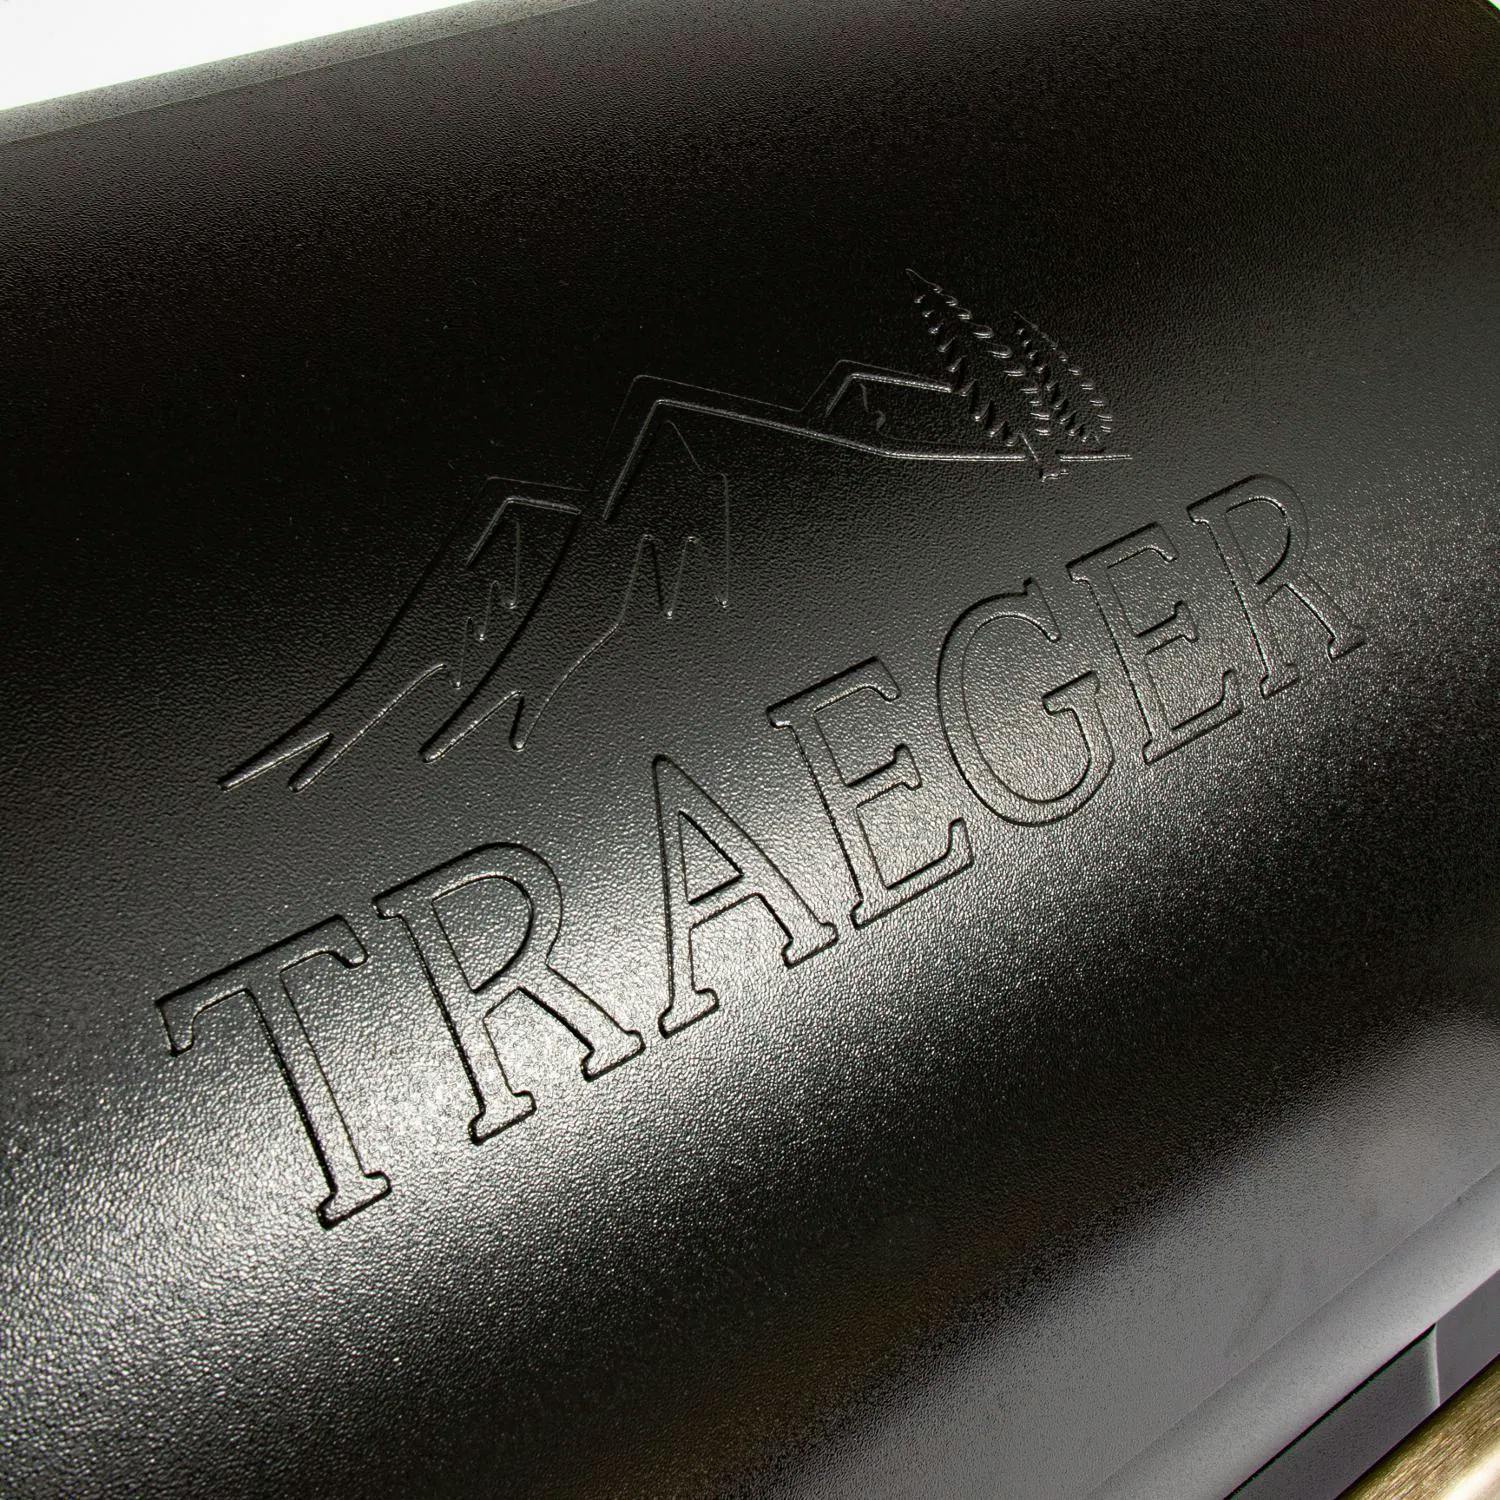 Traeger Ironwood 650 Wi-Fi Controlled Wood Pellet Grill with WiFire & Pellet Sensor · 46 in.